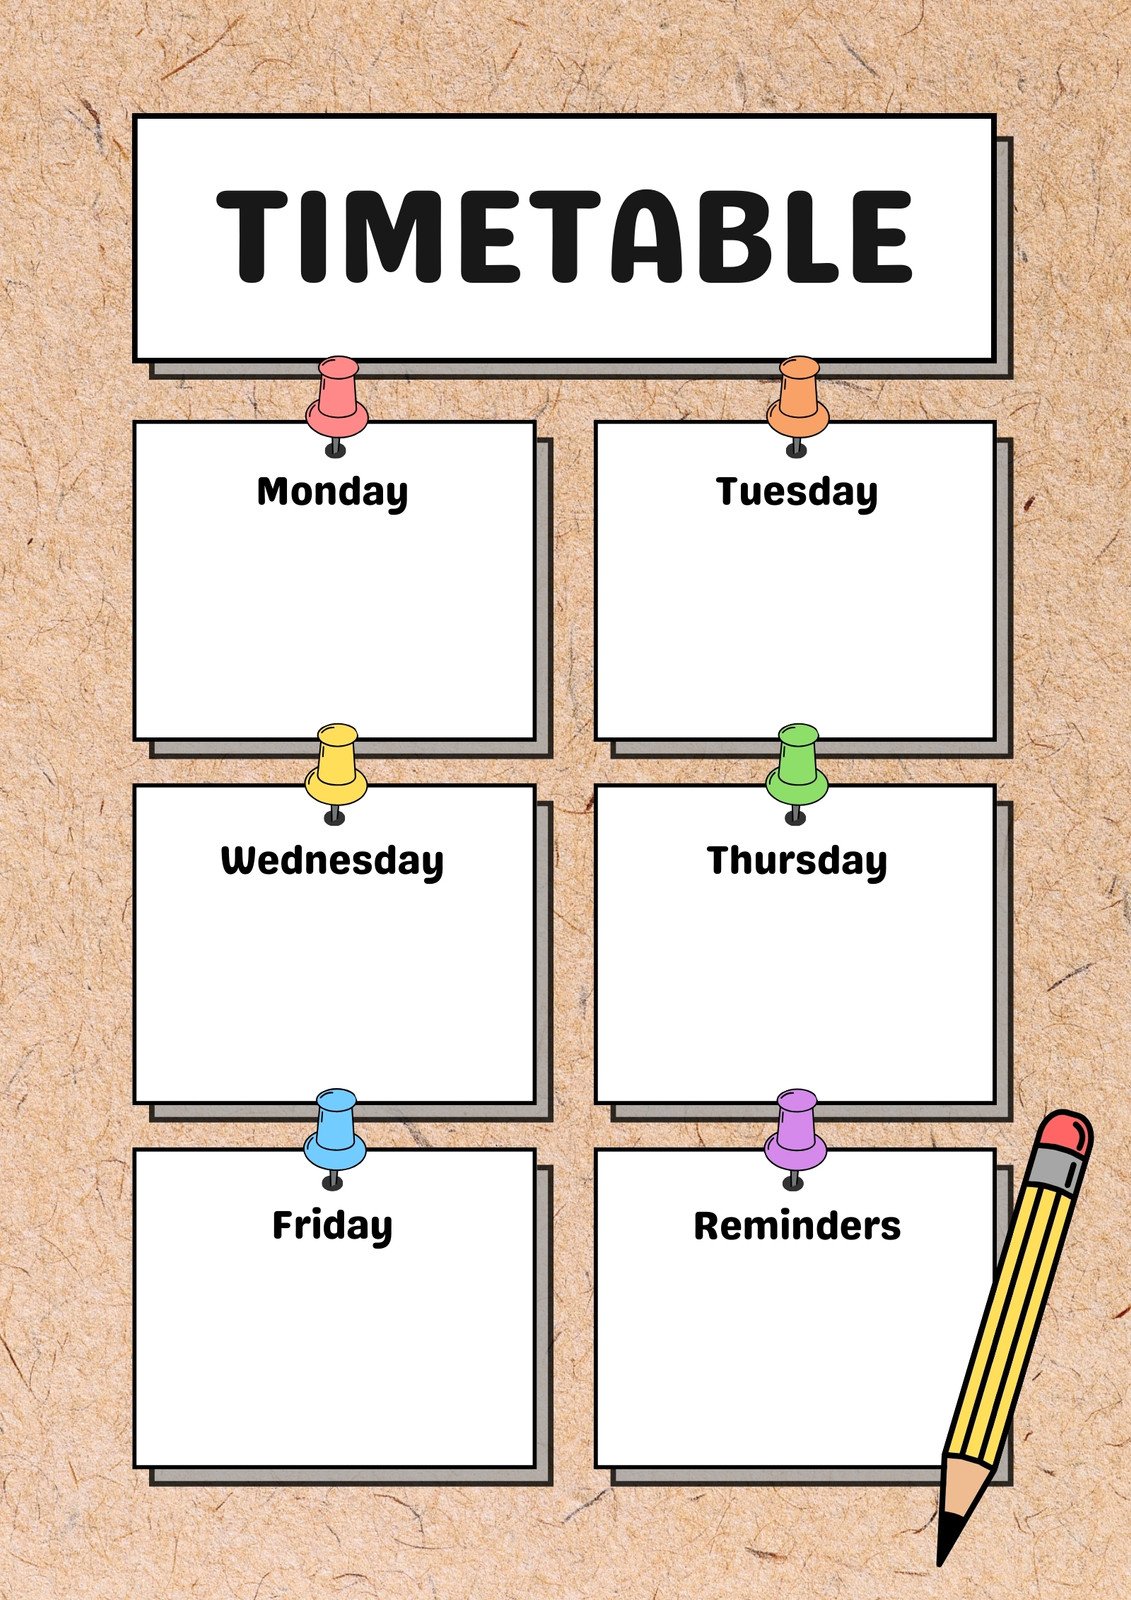 Weekly Timetable Class Schedule in Colorful Retro Style 